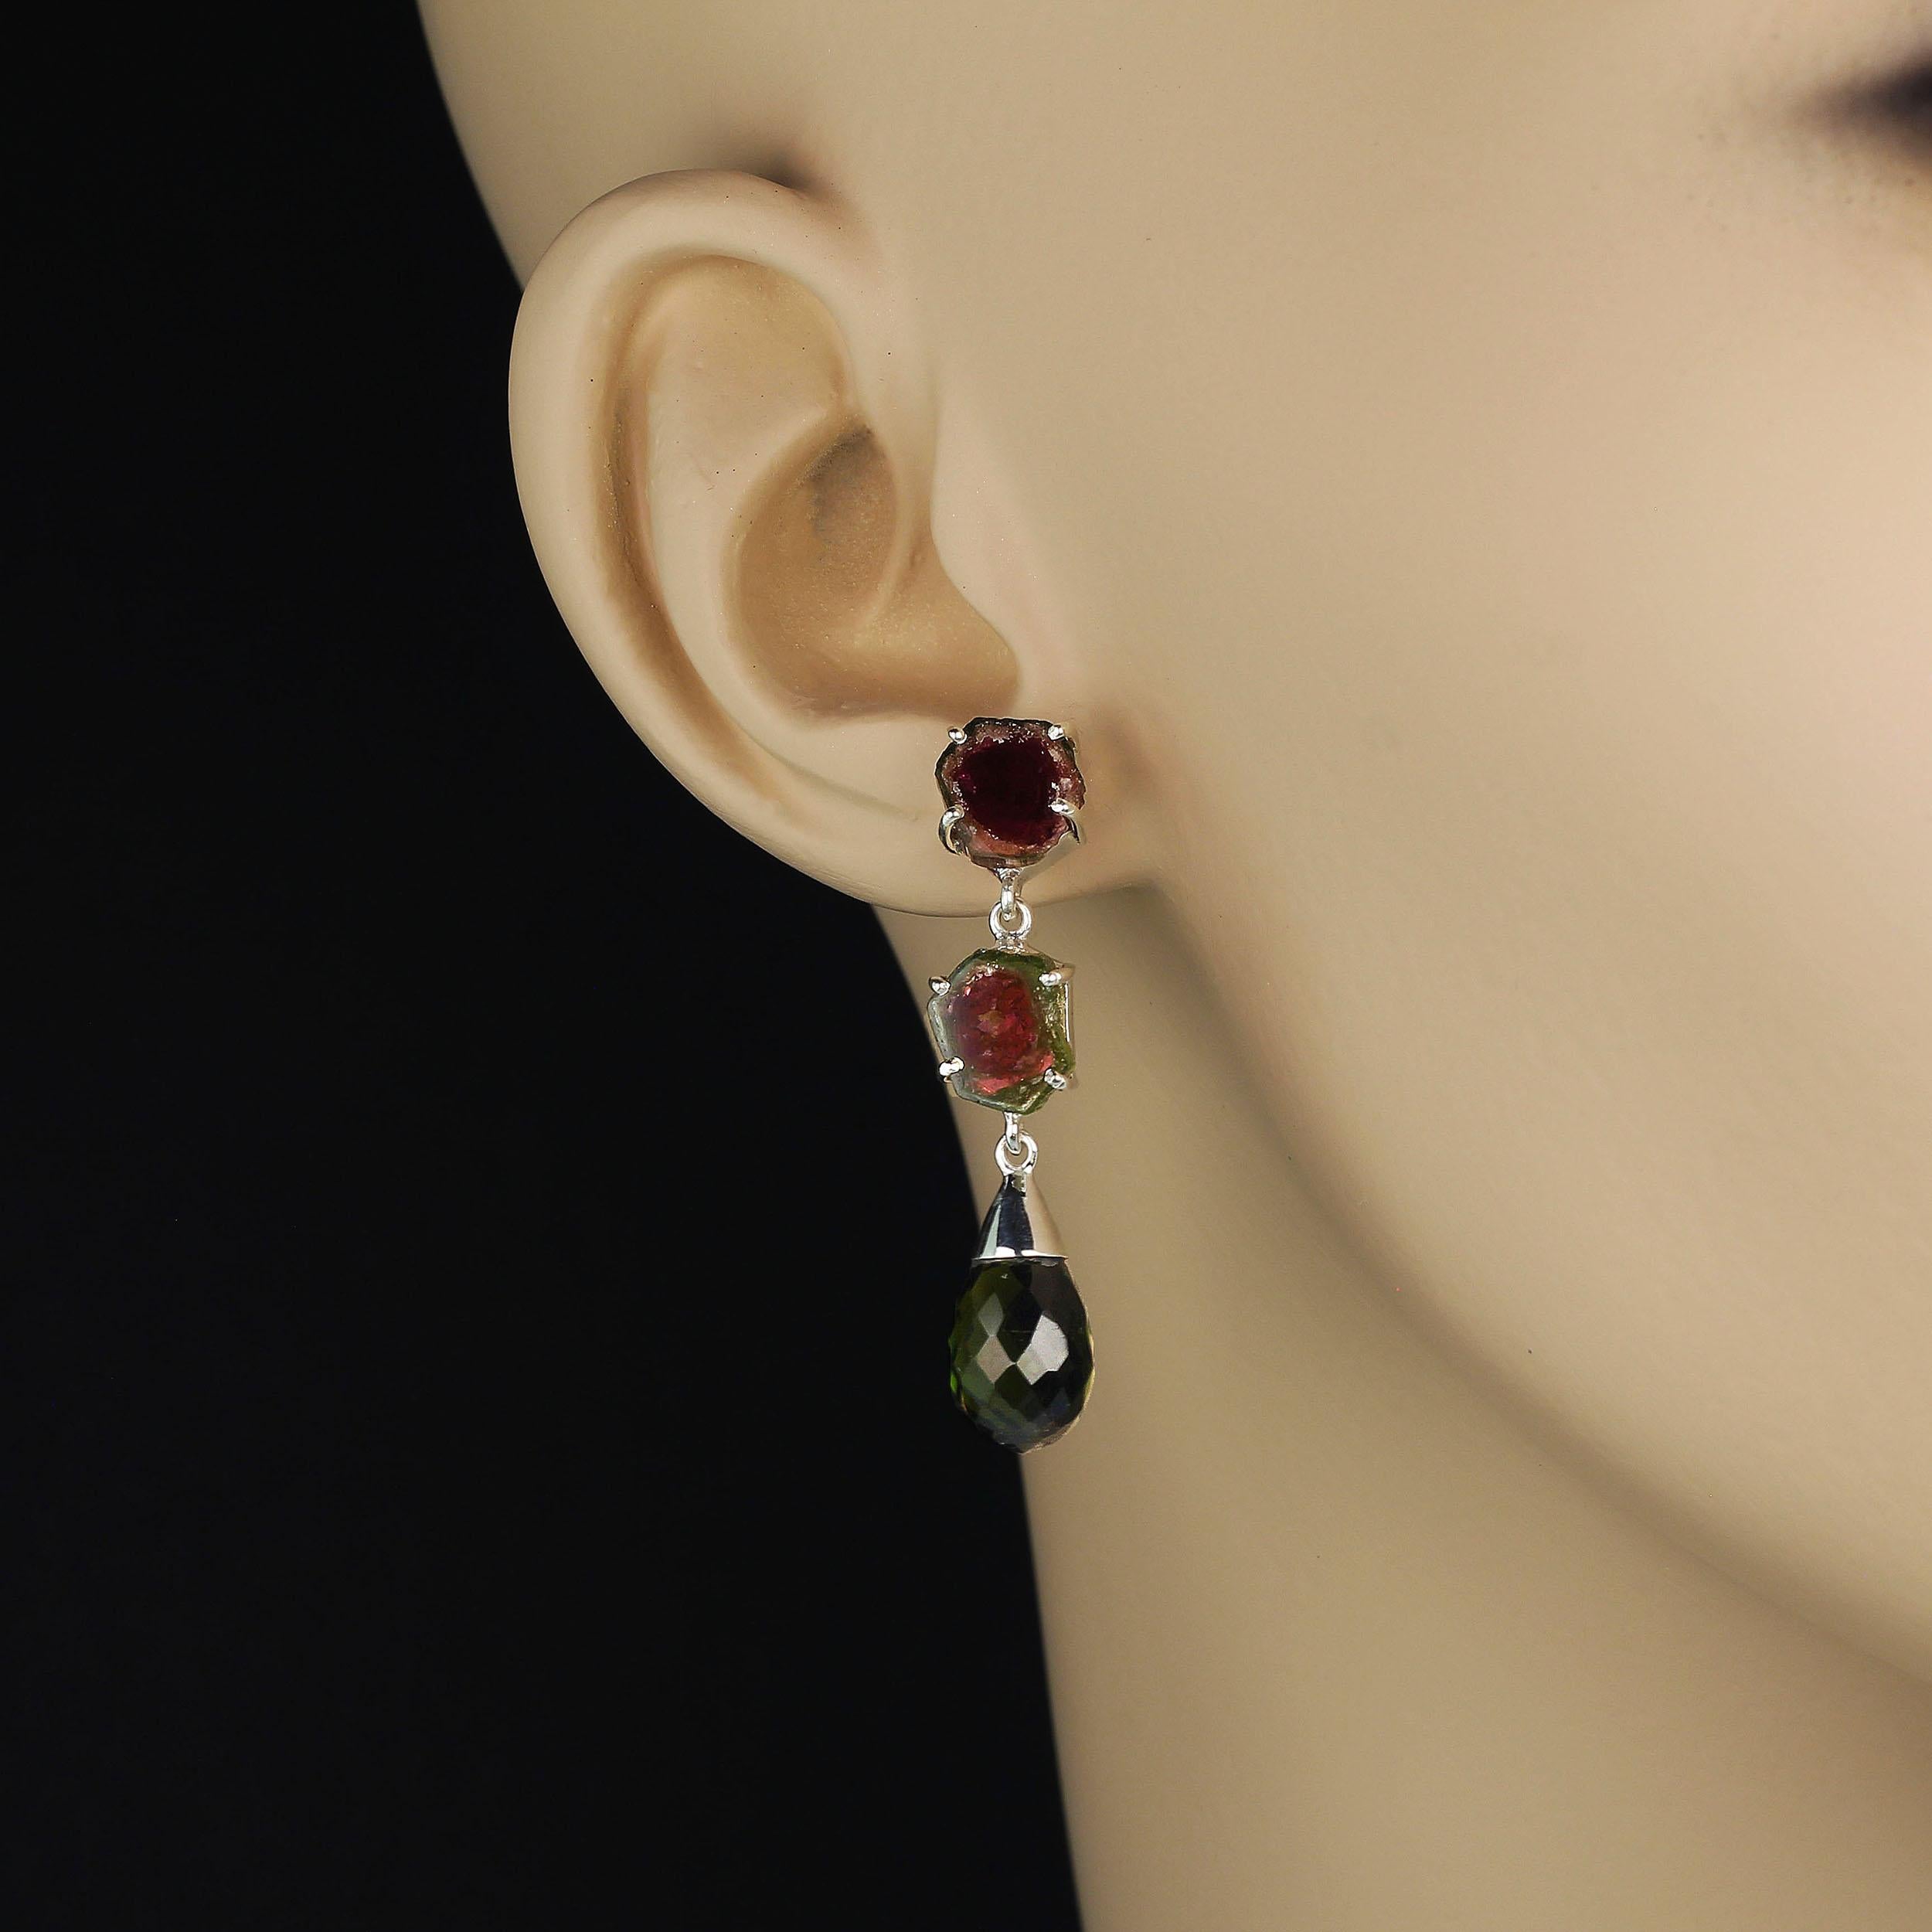 What a great pair of Tourmaline earrings! We've posted two watermelon slices, one above another, and then hung a beautiful faceted green tourmaline briolette below them. All of this in handmade sterling silver. These earrings are 1.5 inches in